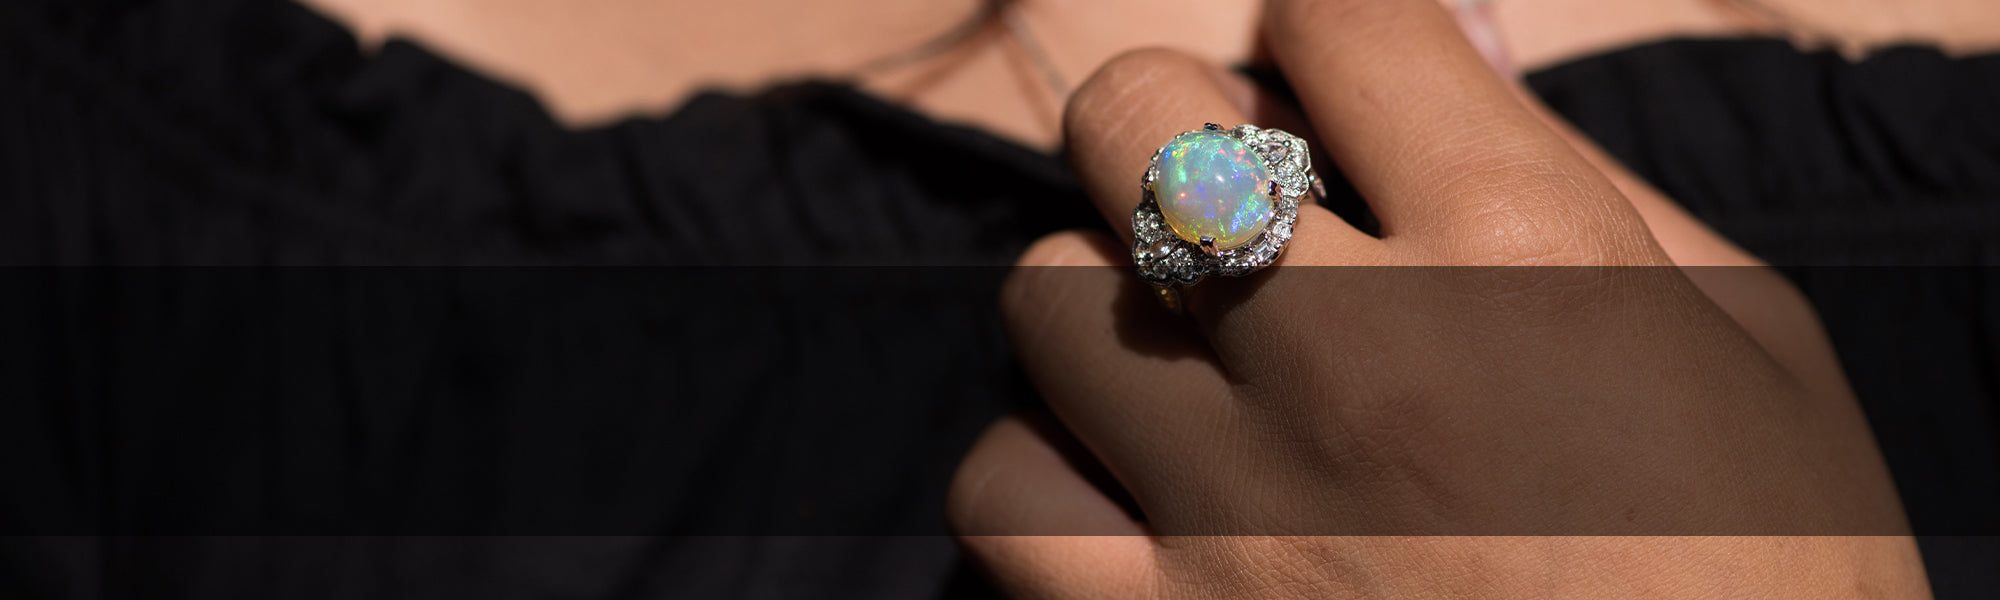 Woman Wearing Opal Ring by Park City Jewelers